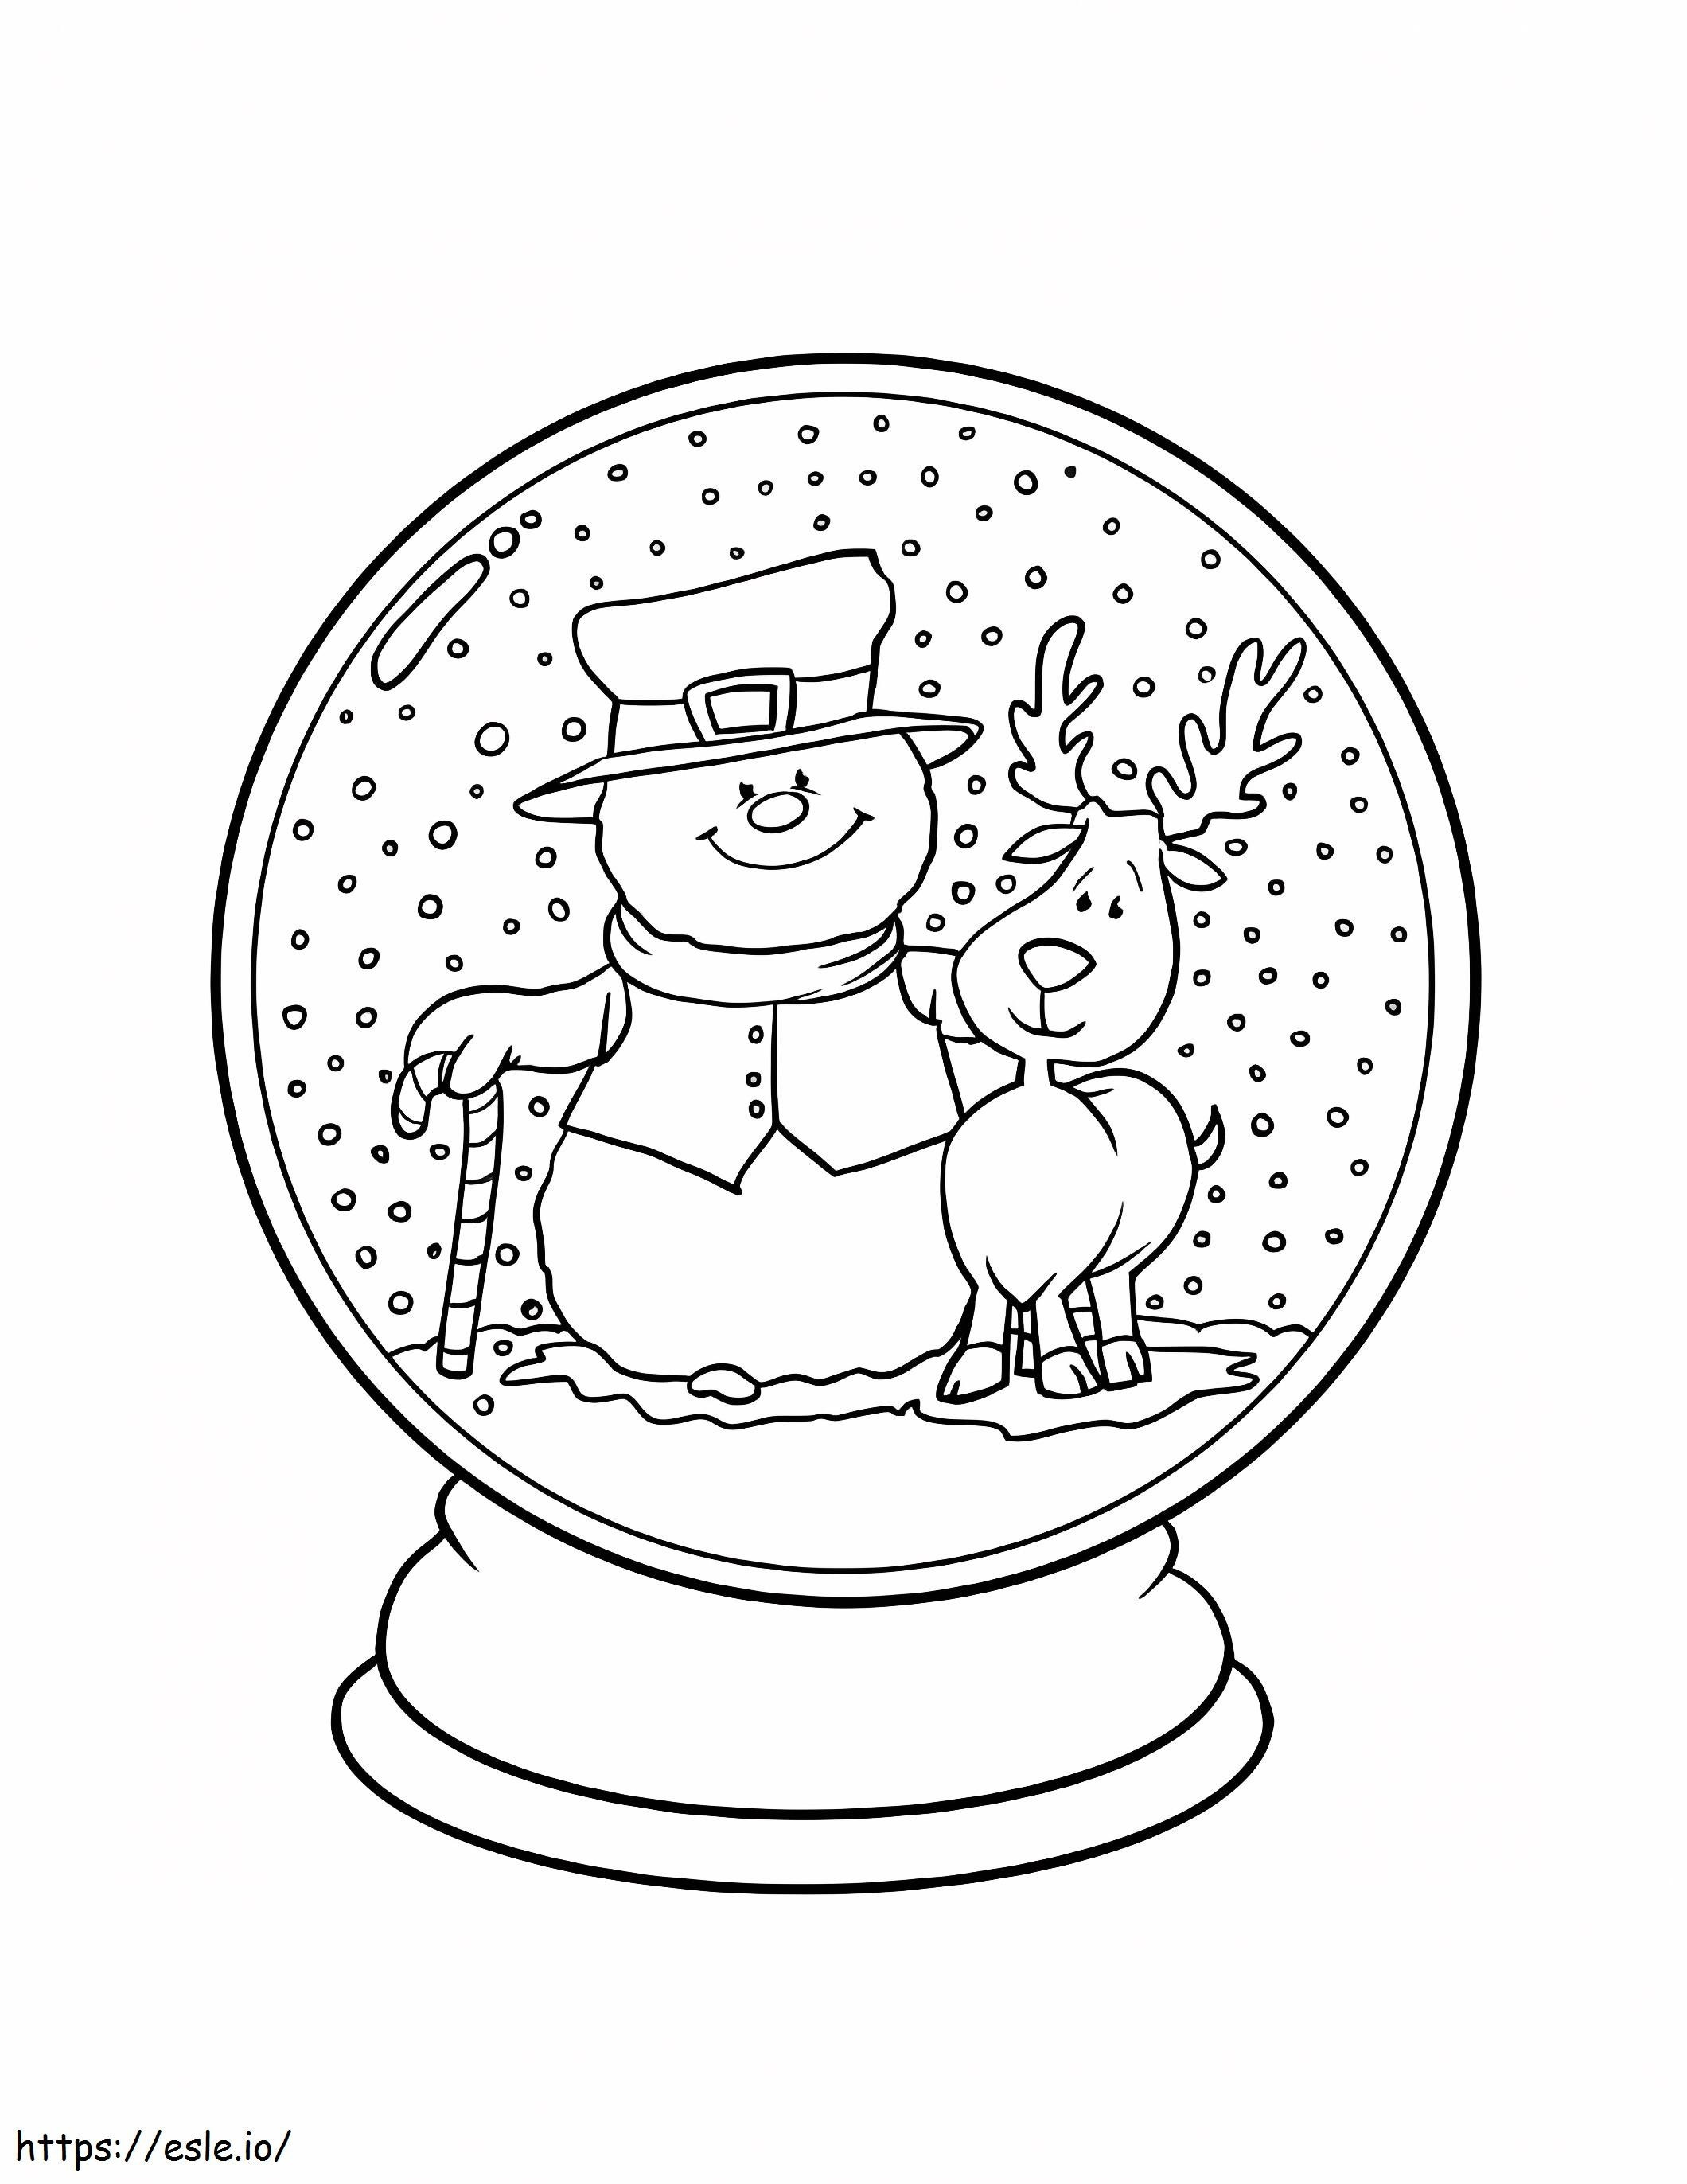 Snow Globe With Snowman And Reindeer coloring page